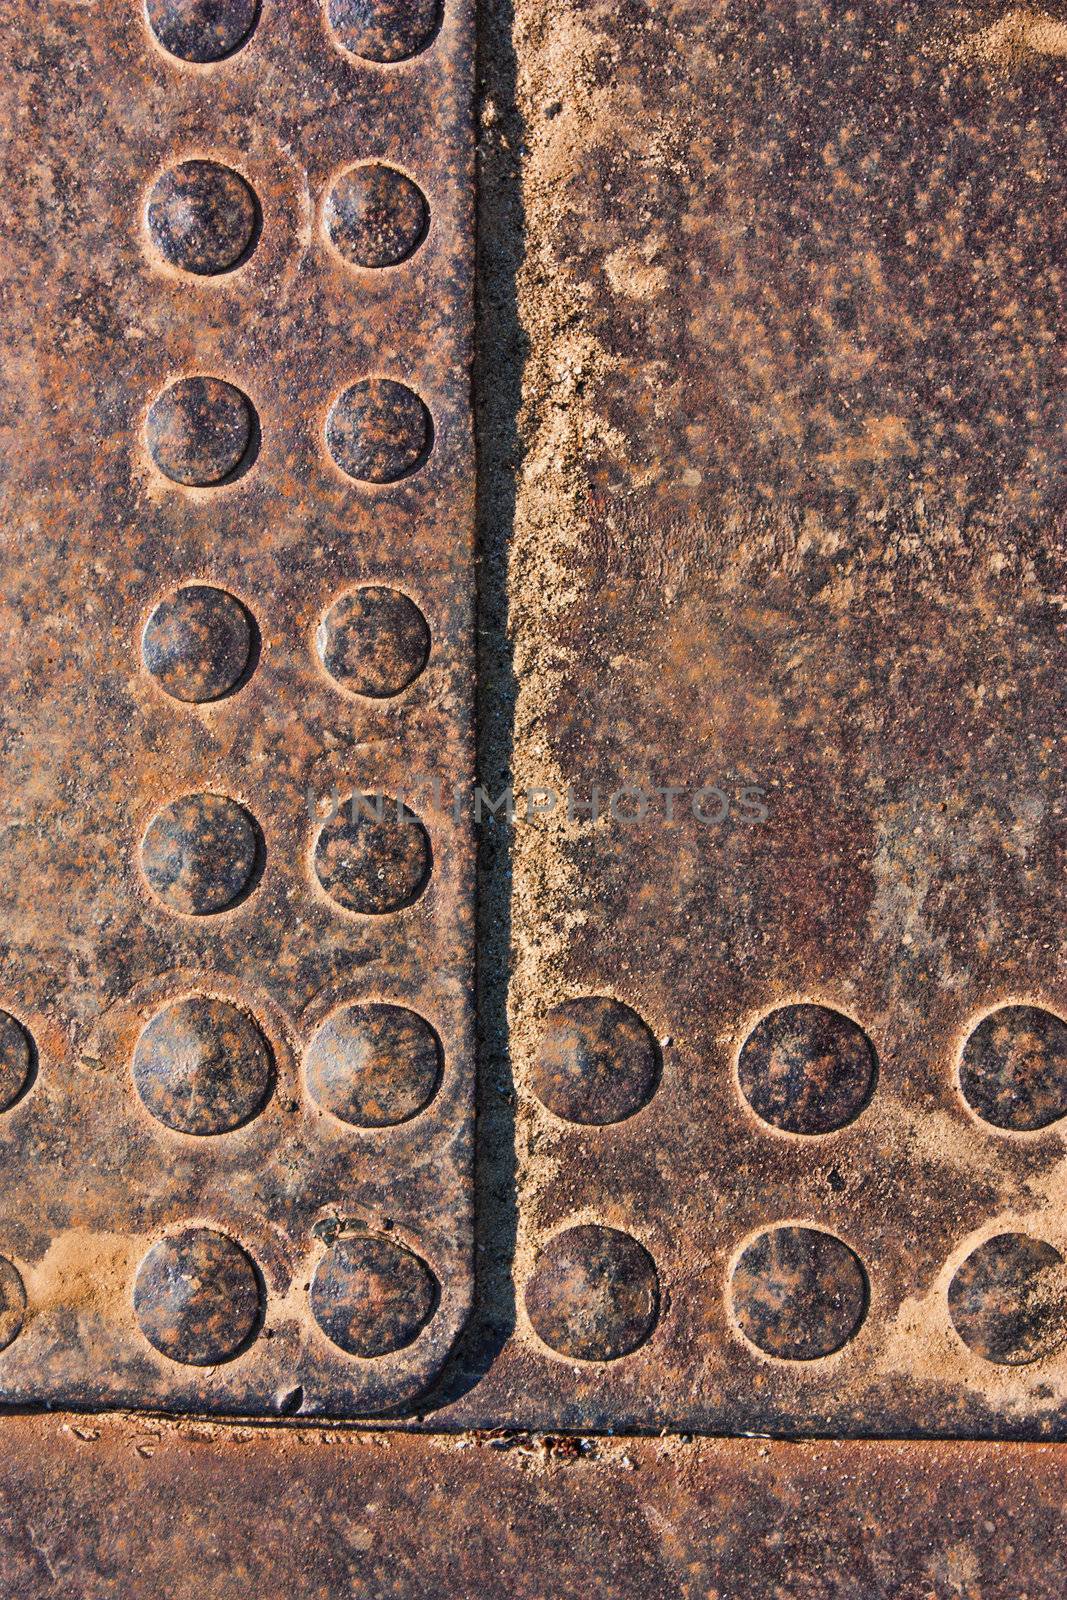 background of the rivets on rusty metals